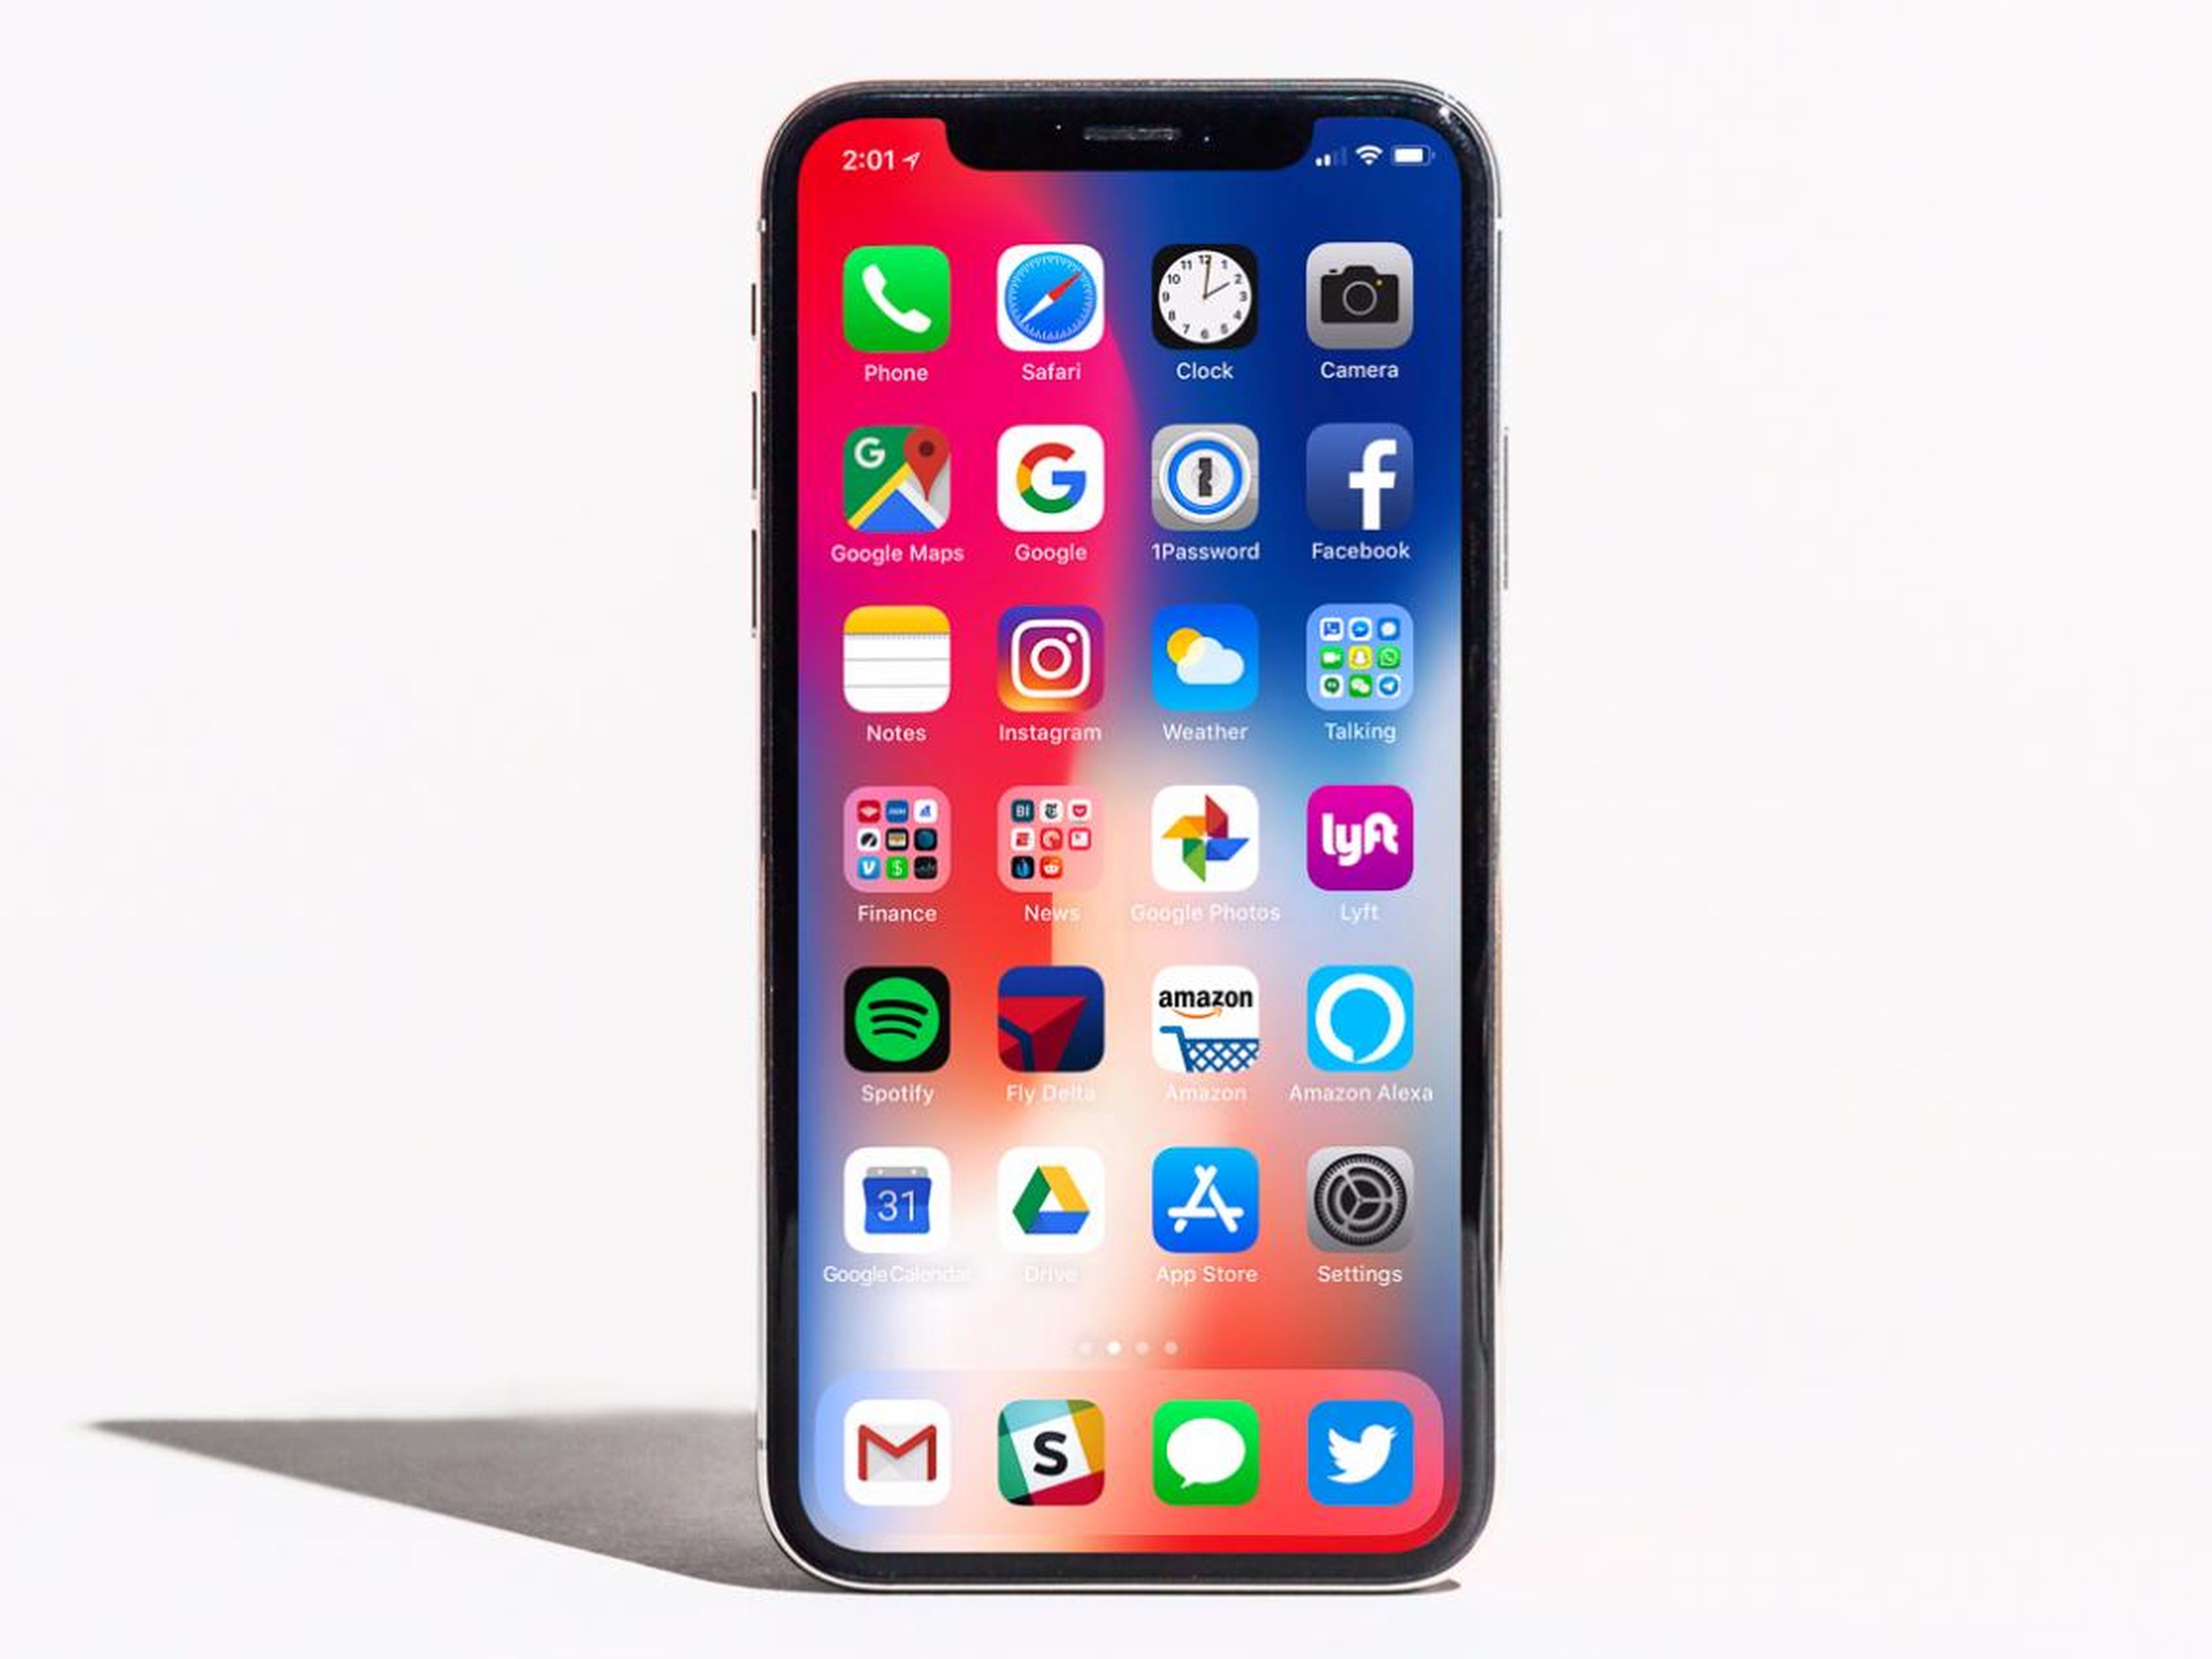 The iPhone X runs on the latest version of iOS, and the Galaxy Note 9 runs on an older version of Android.